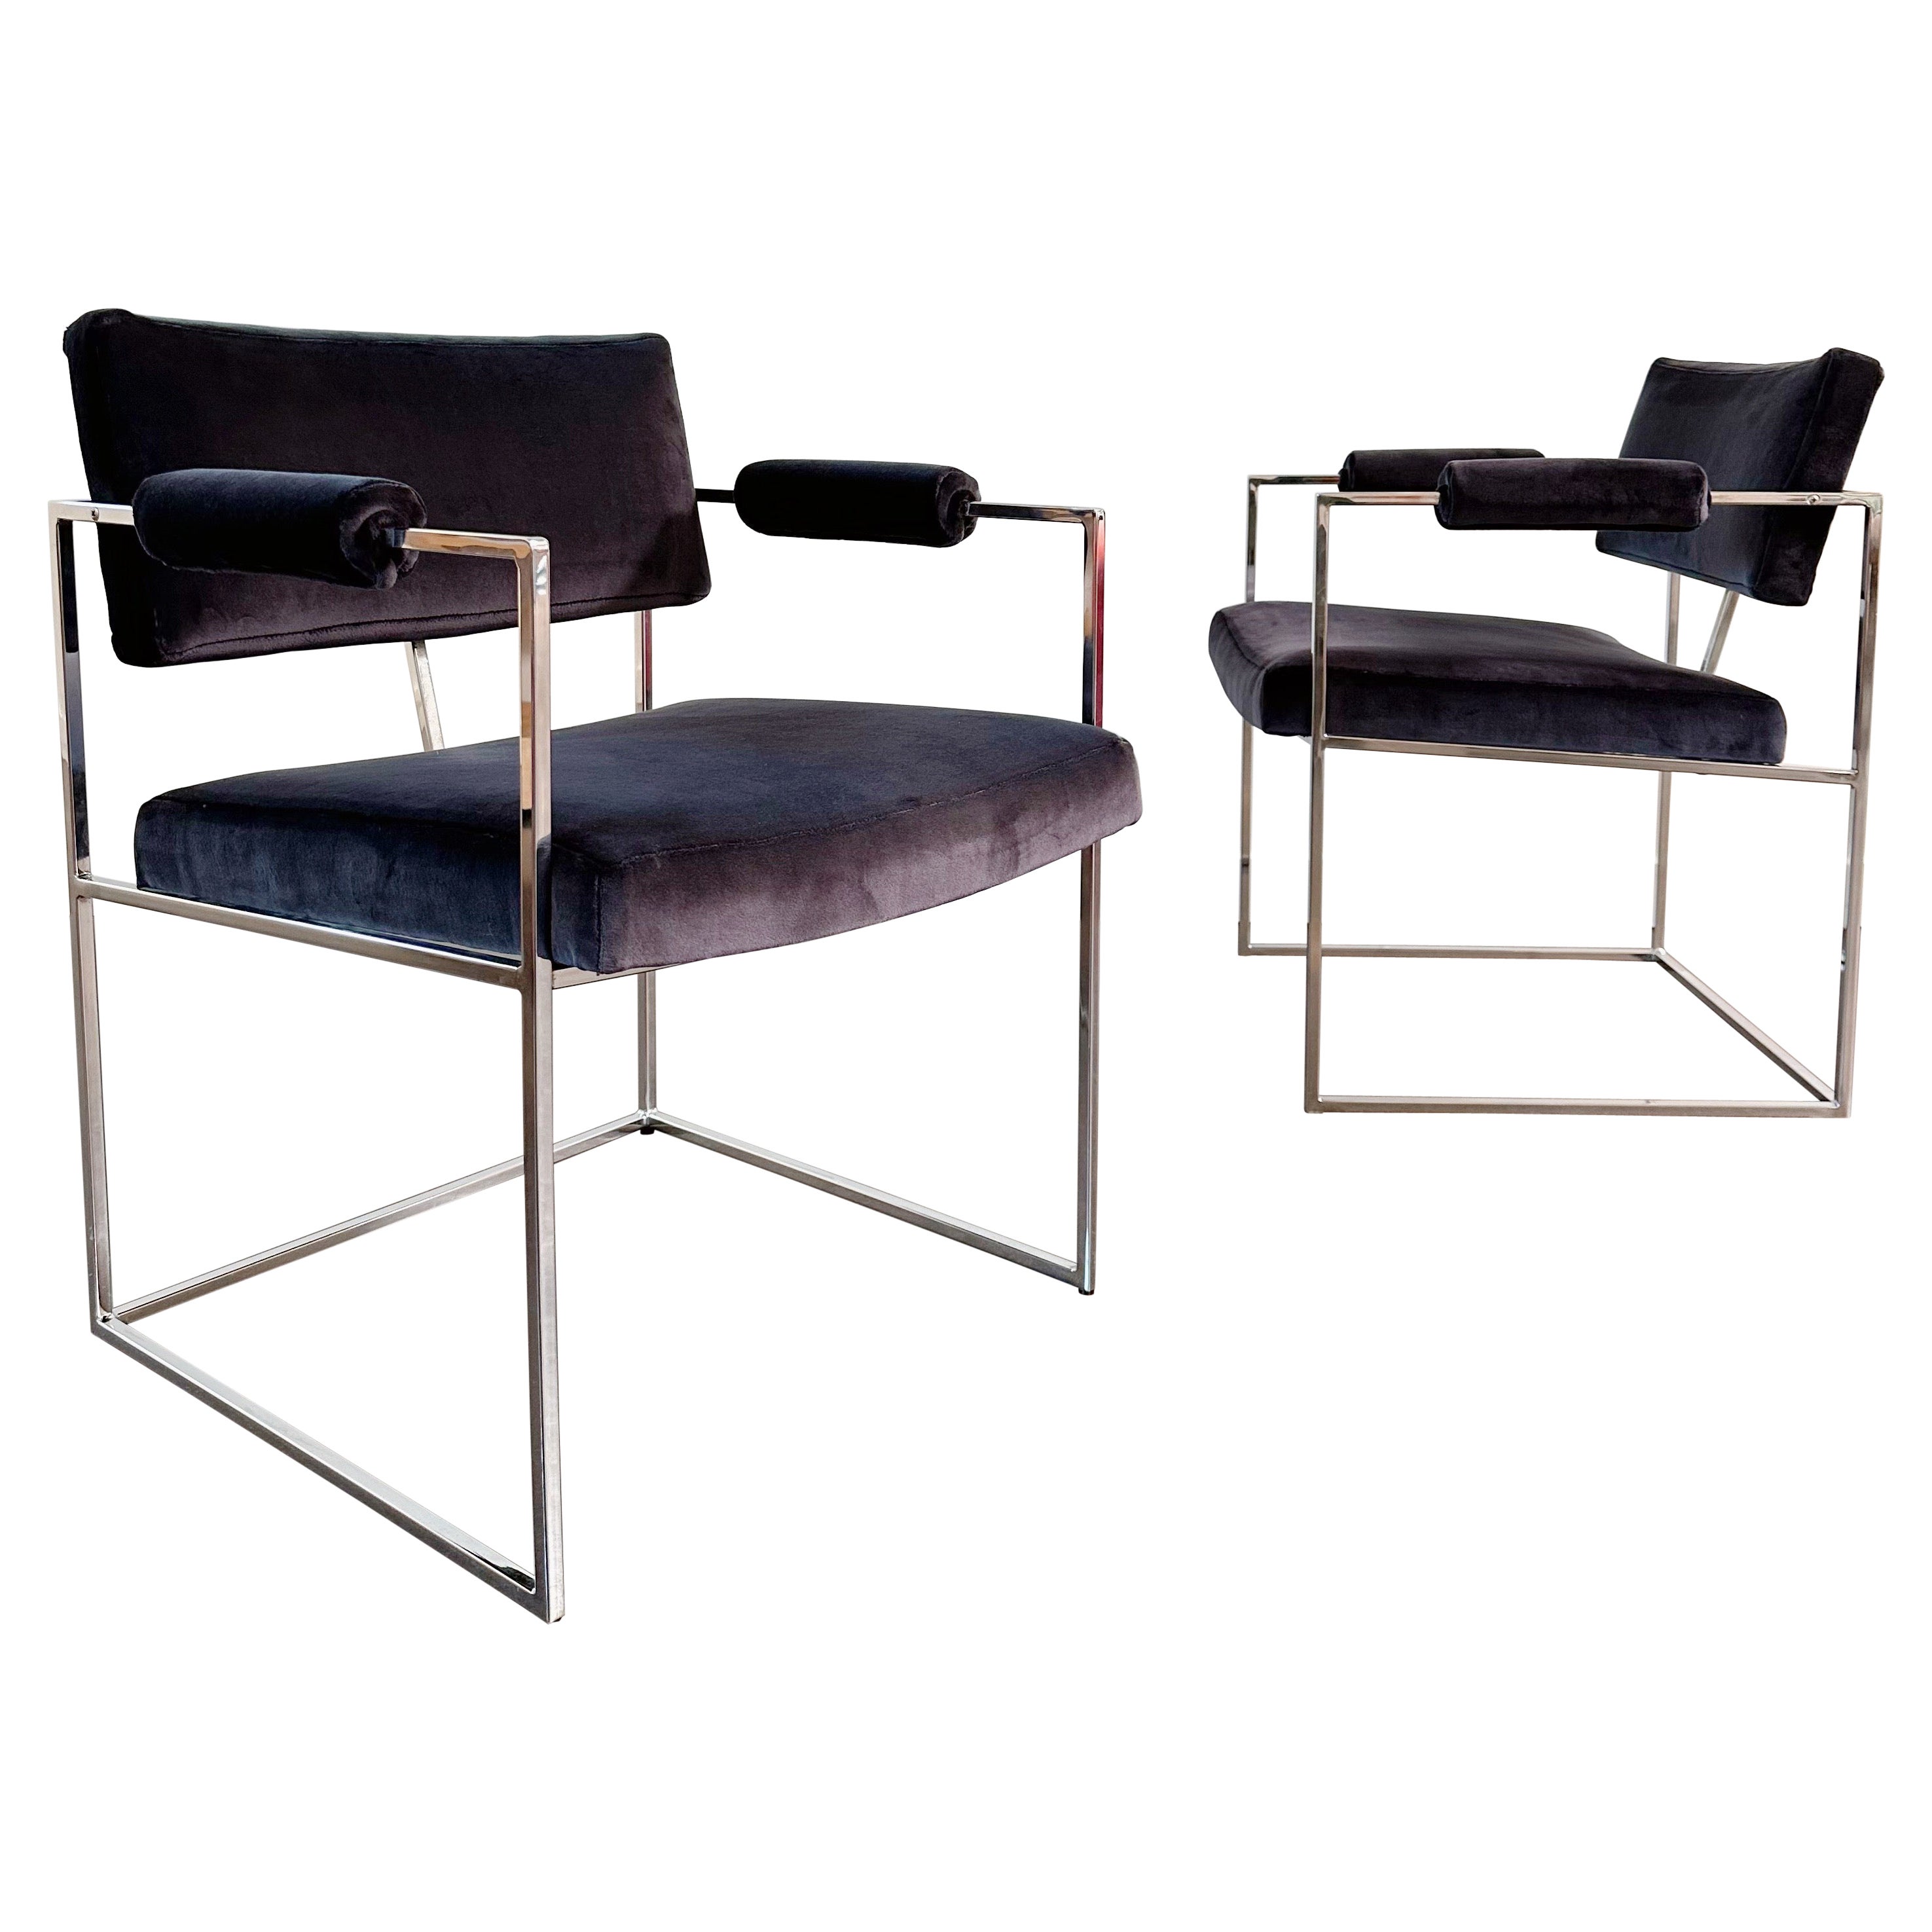 A Pair of 1188 'Thin Line' Armchairs by Milo Baughman For Sale